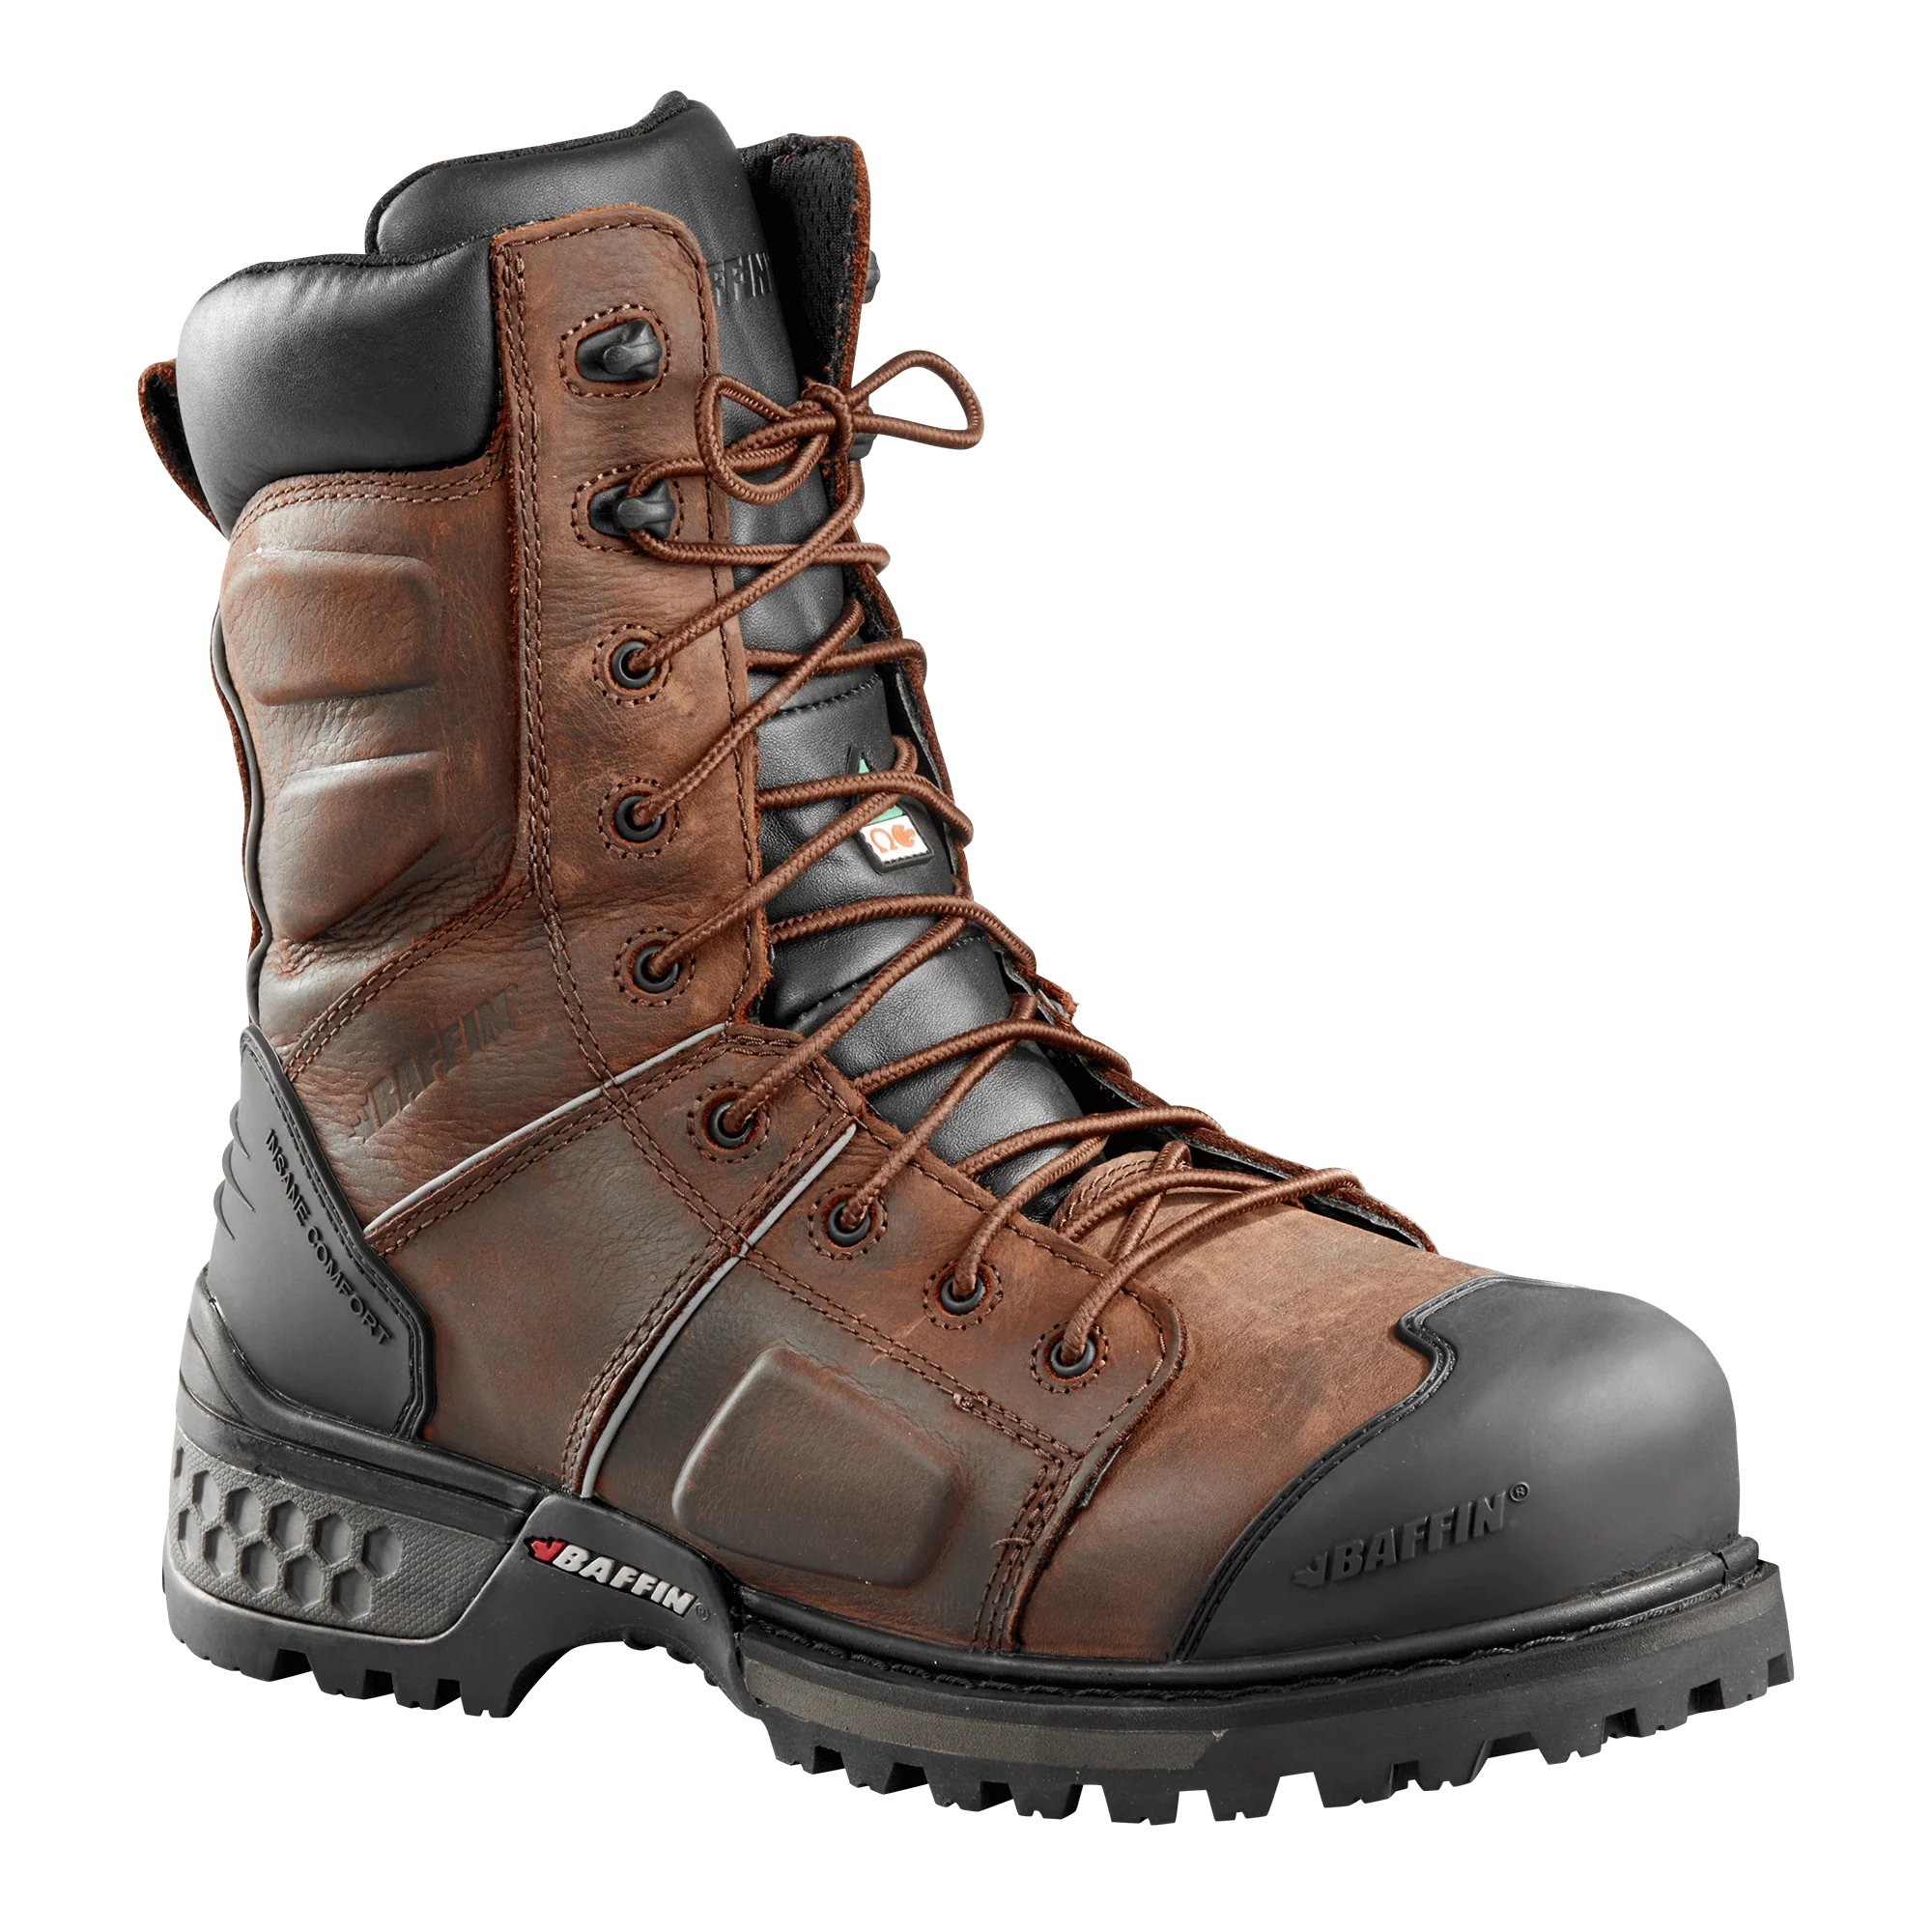 STC – Monster – Boot – #MNST-MP01 – Brown